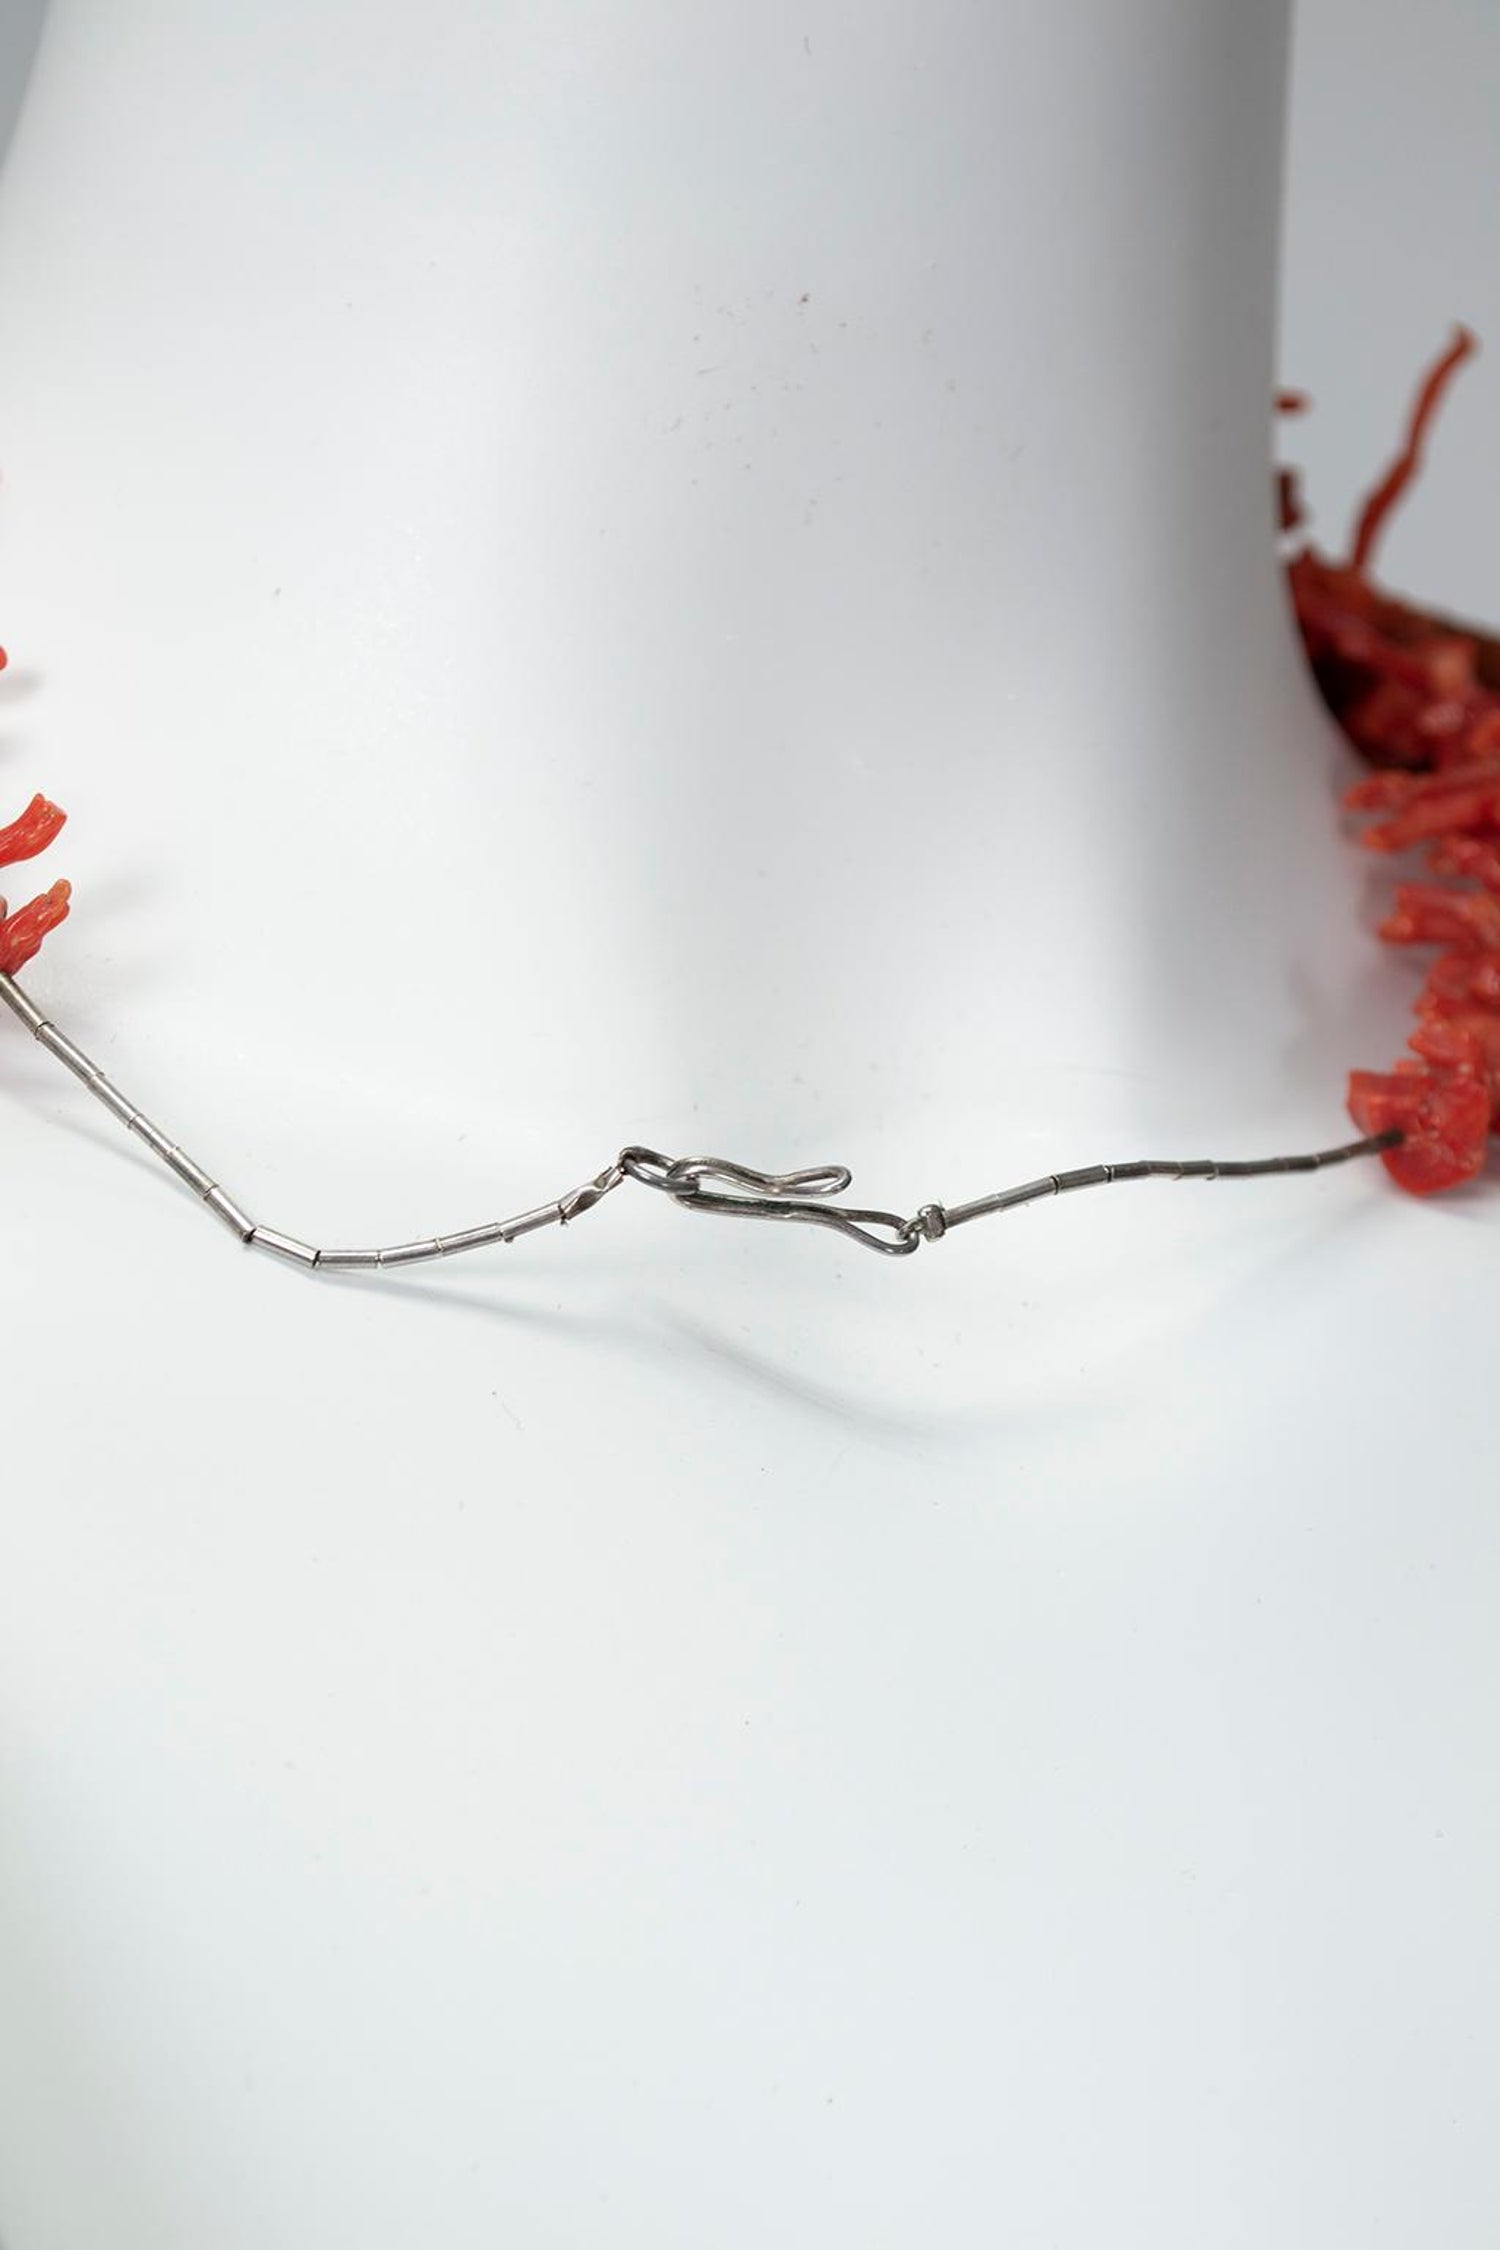 Oxblood Red Branch Coral and Silver Bead Necklace - 16", 1970s at 1stDibs